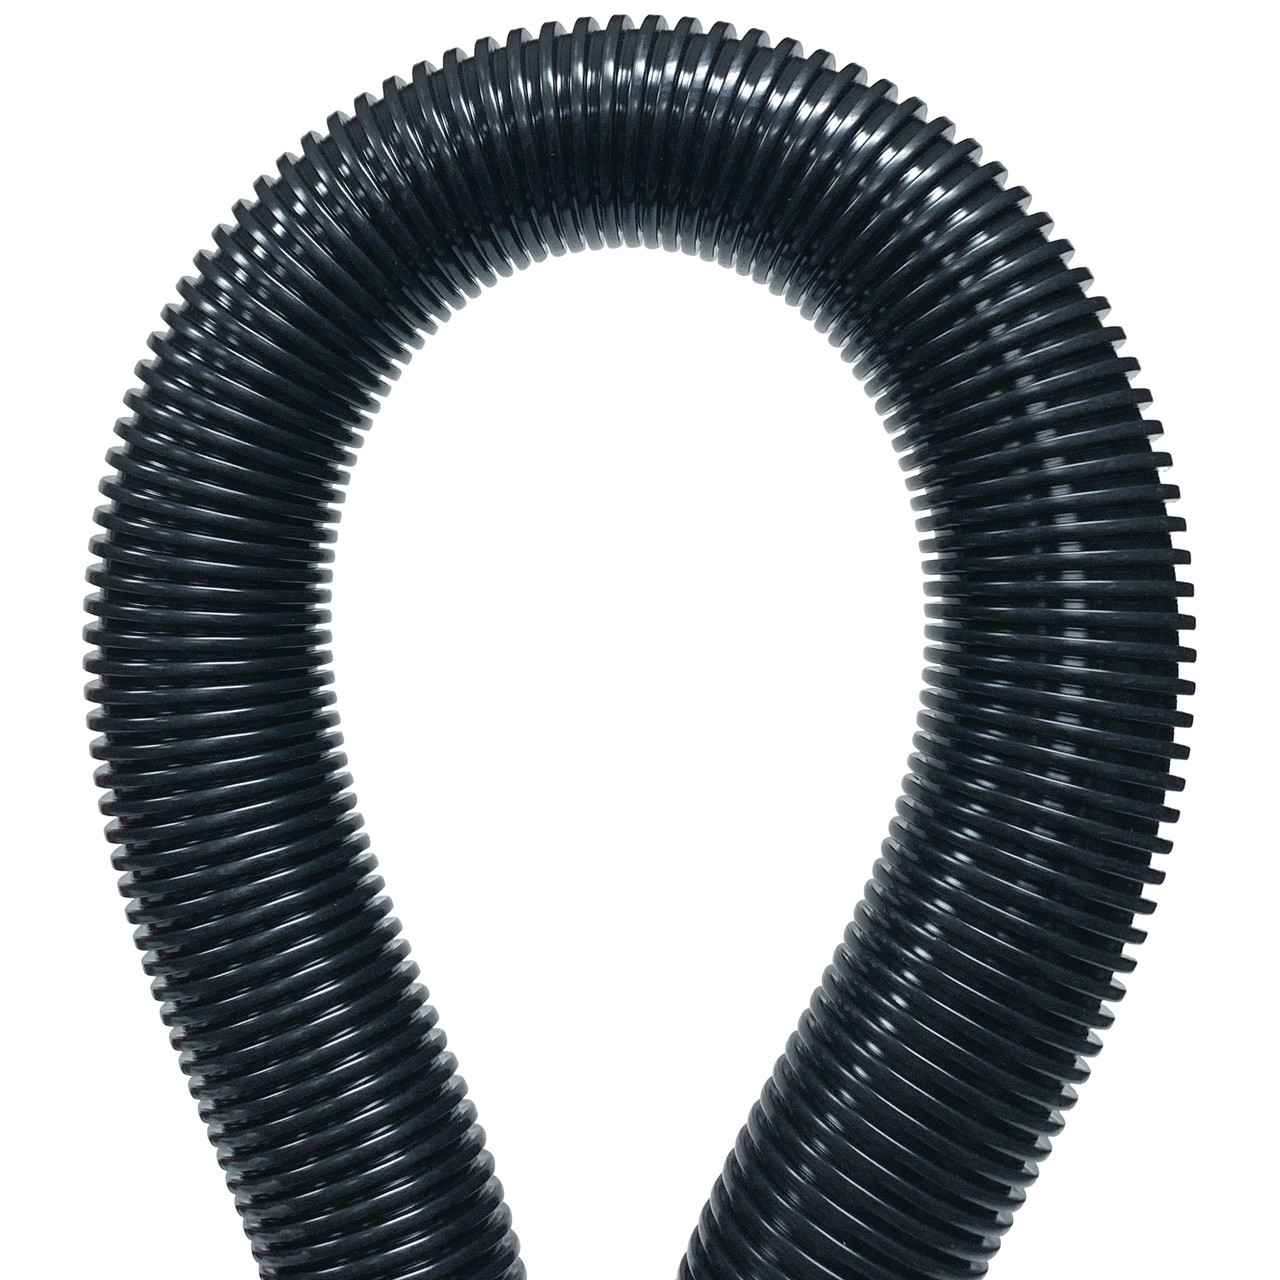 20 Foot Commercial Grade Shop Vacuum Replacement Hose with Swivel